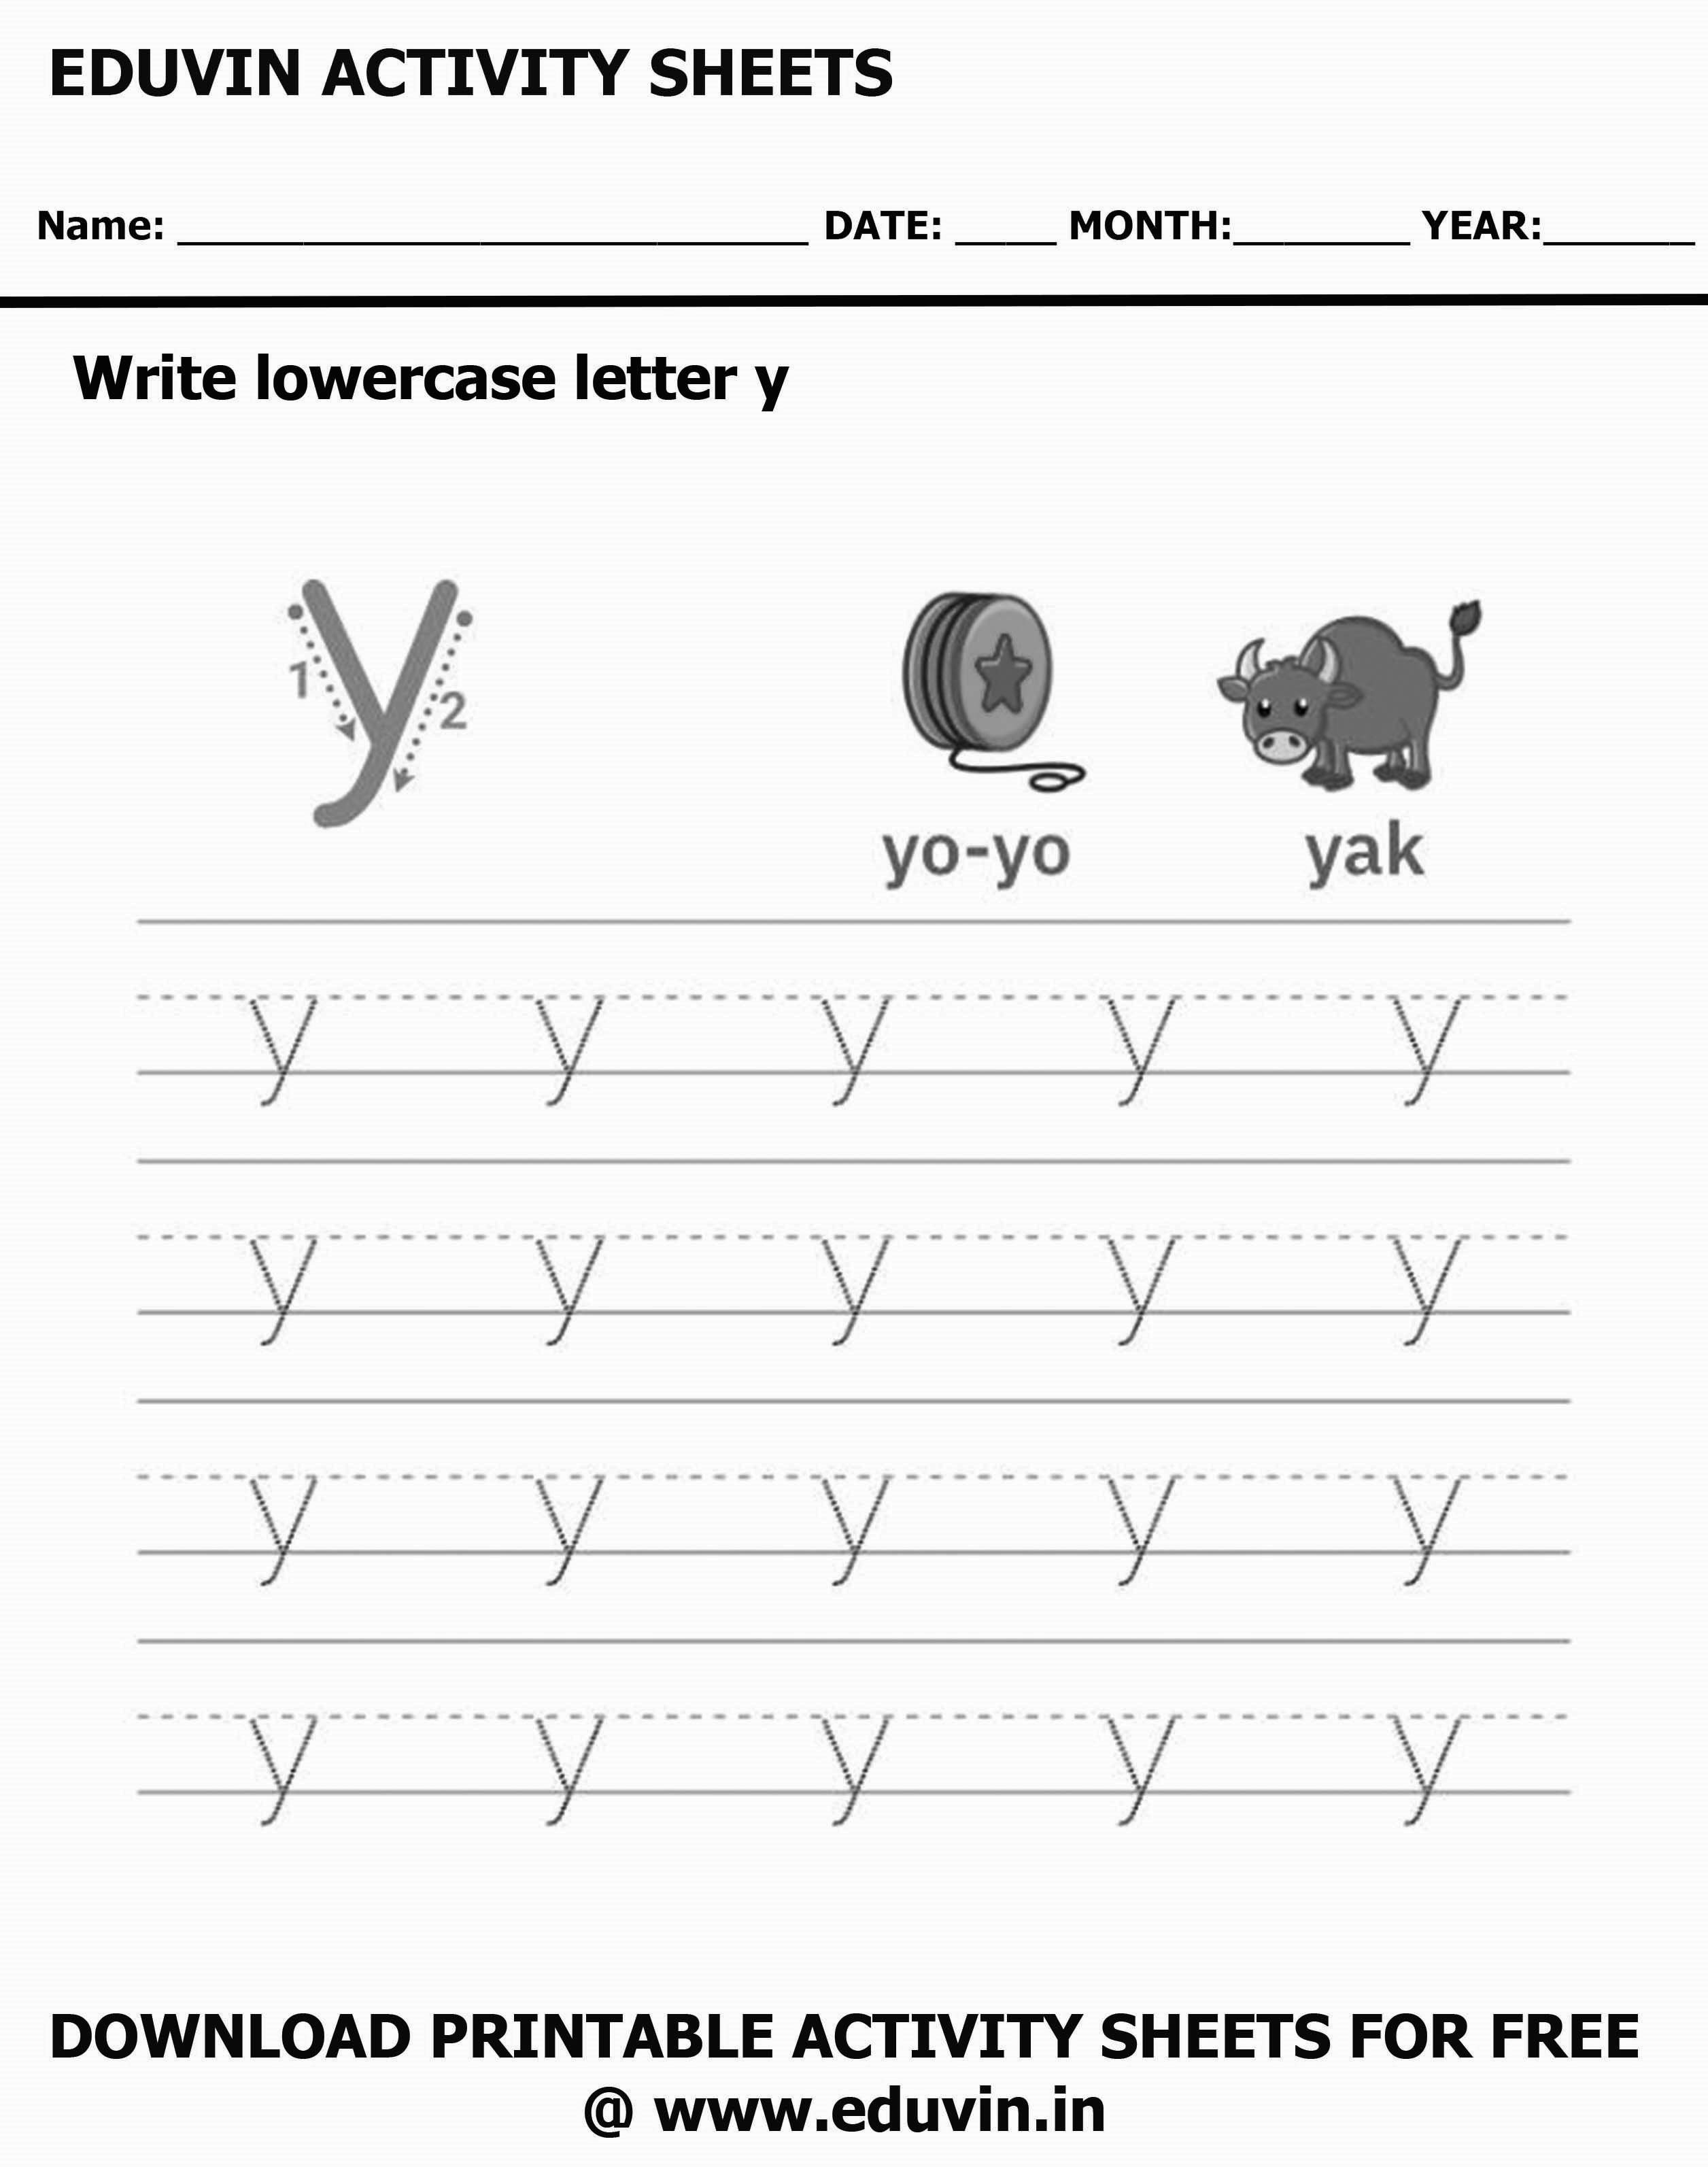 Lowercase Alphabet y Worksheets | Letter y Trace and Write Activity Sheet For Tracing and Letter Writing For Kids